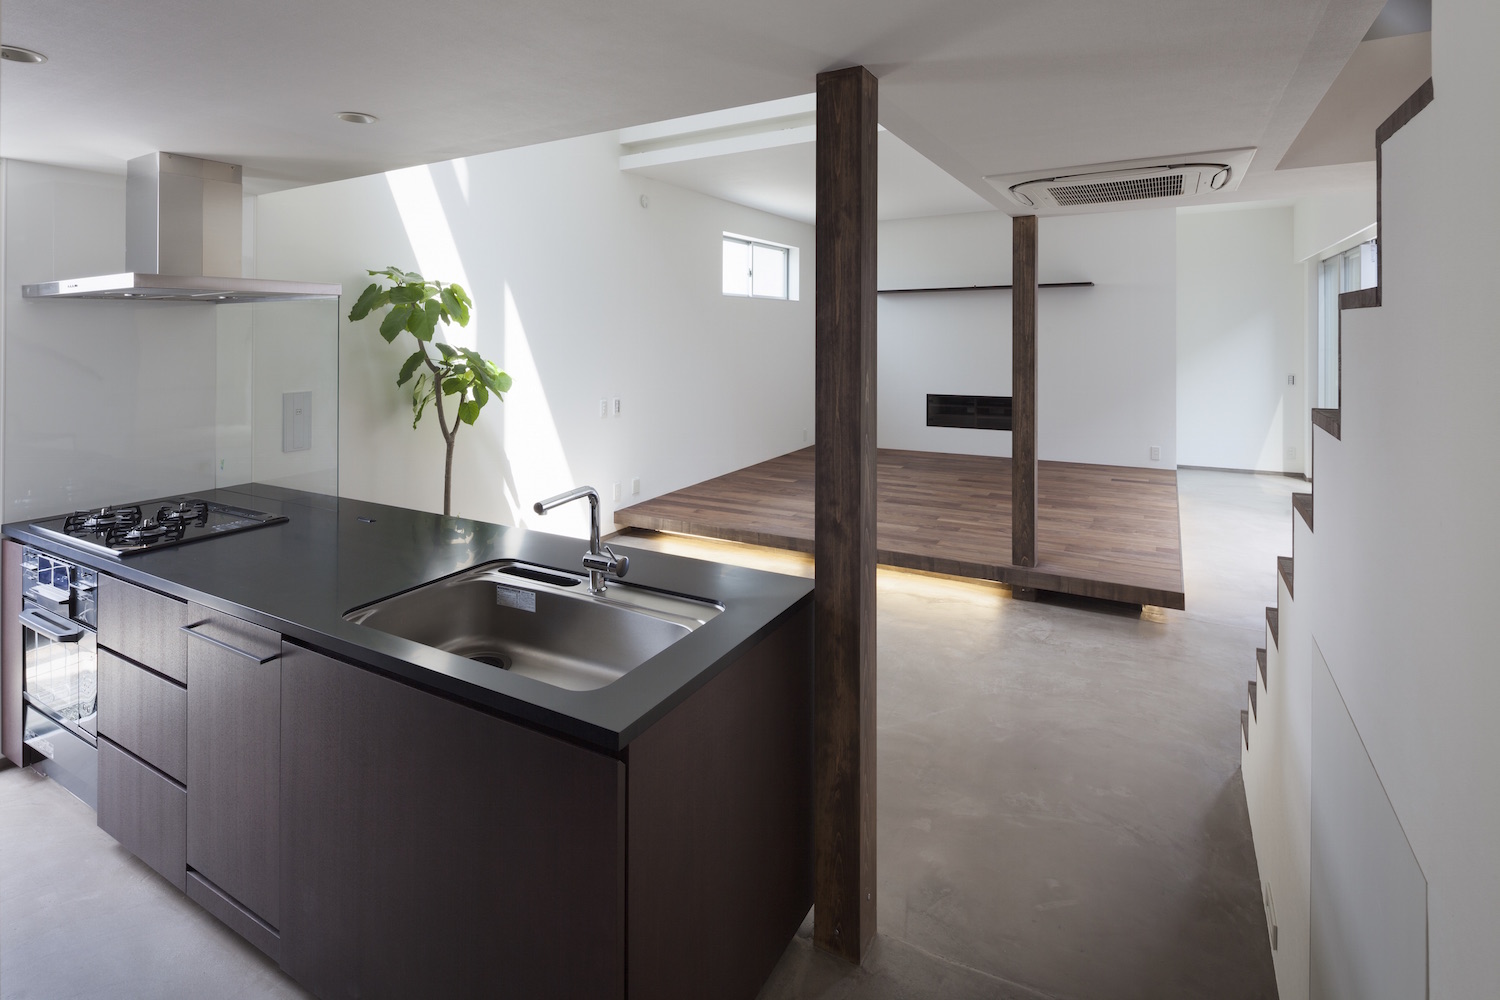 House in Chigasaki by LEVEL Architects